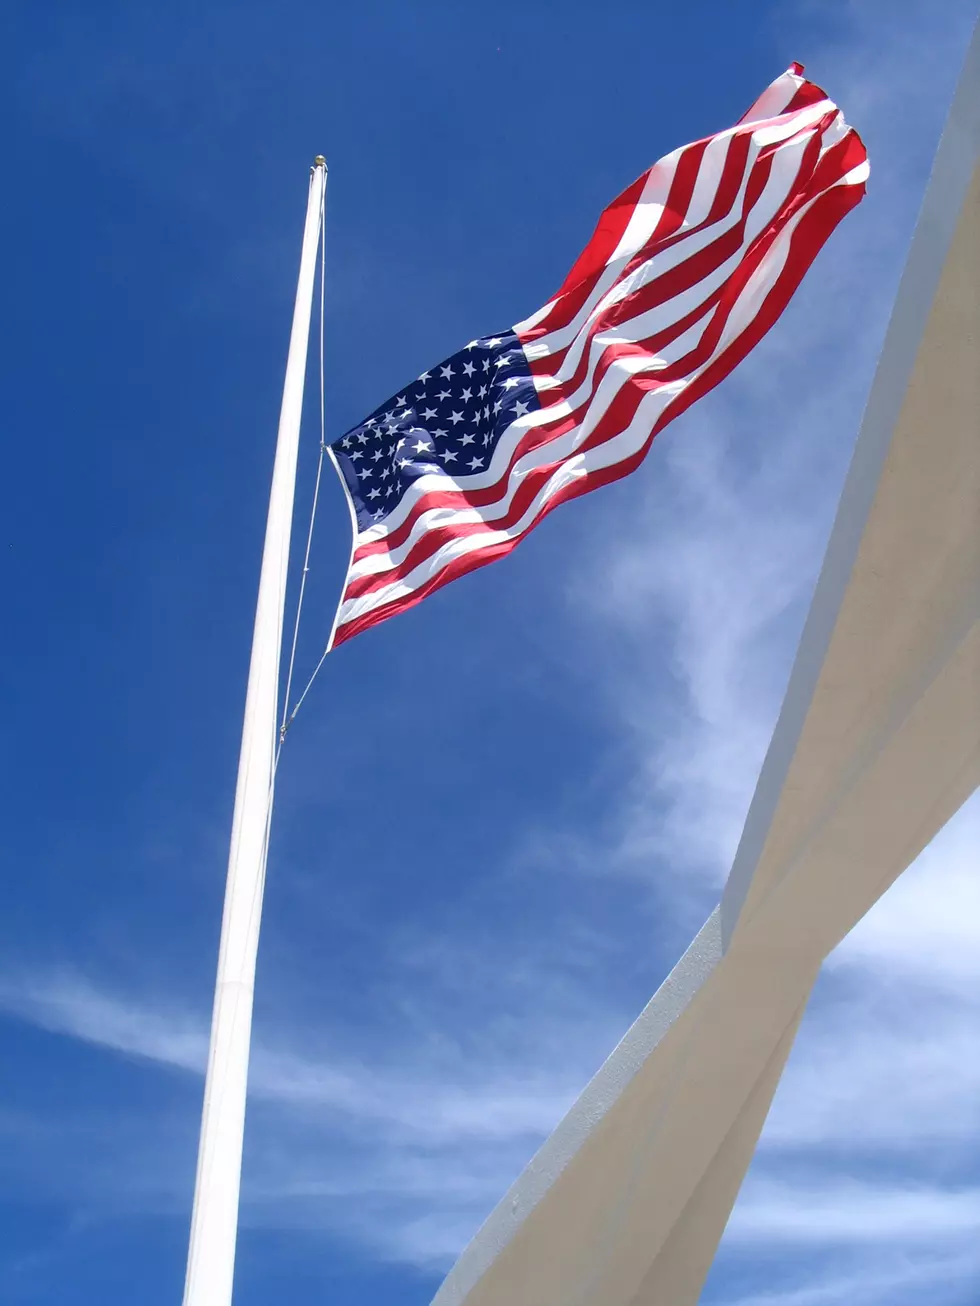 Flags Half Staff Nationwide to Honor Las Vegas Victims